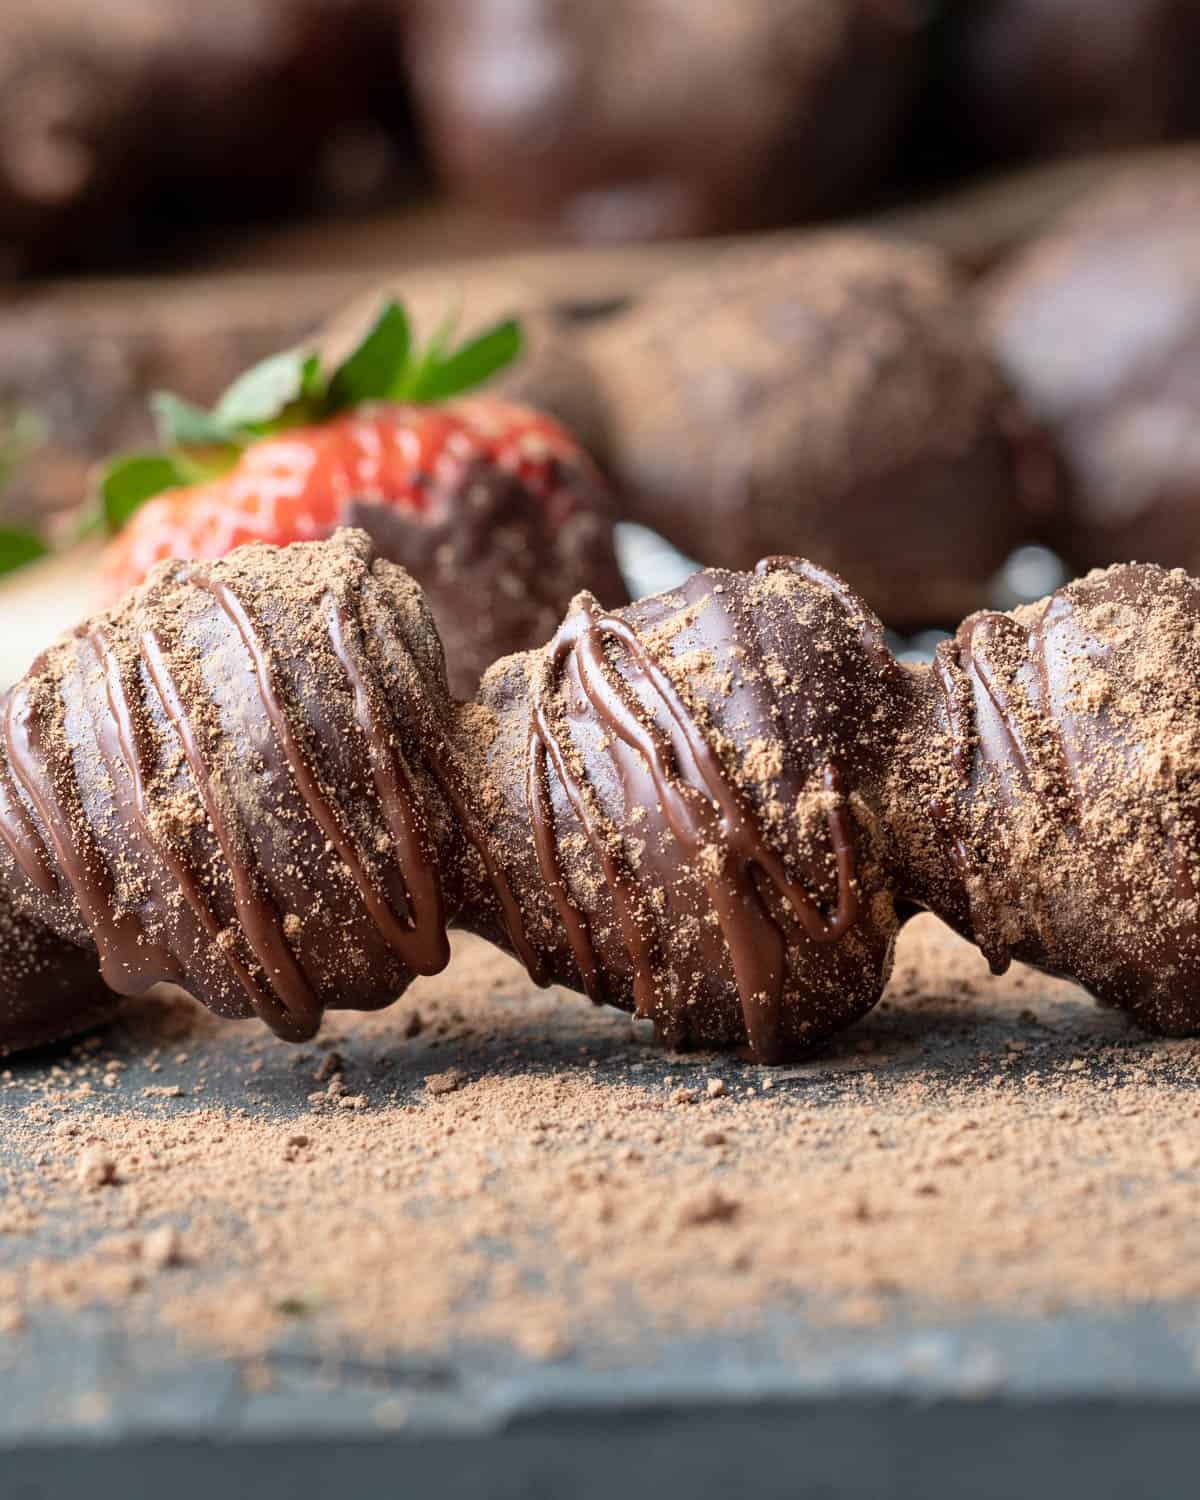 Close up of fresh strawberries covered in chocolate and drizzled with cinnamon.